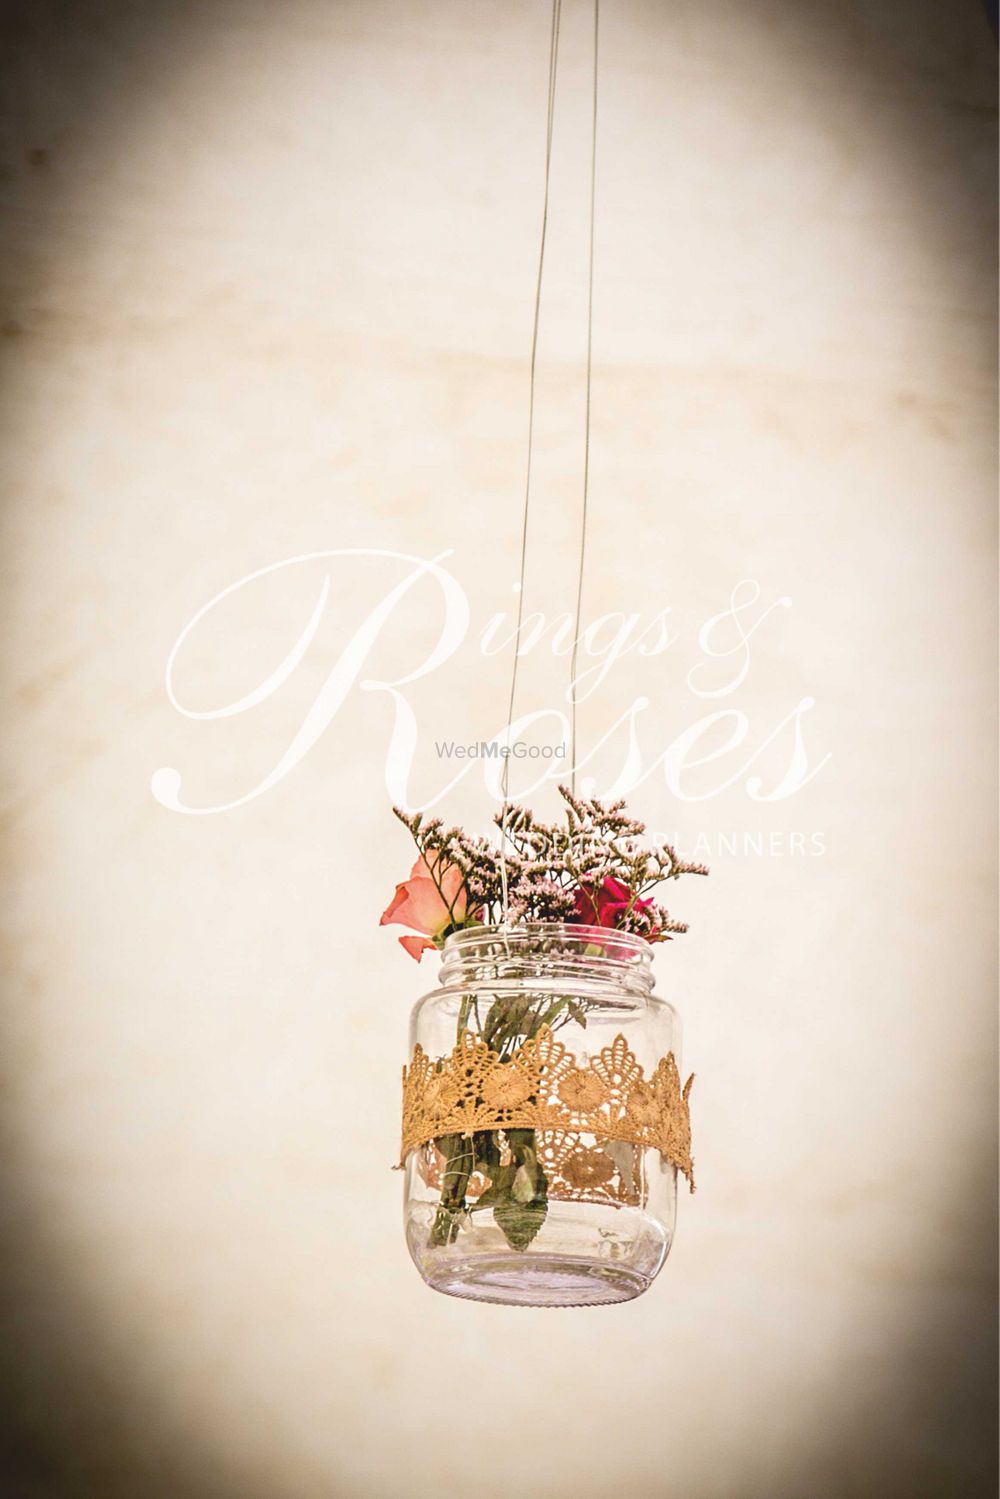 Photo of Hanging glass jars with flowers in decor